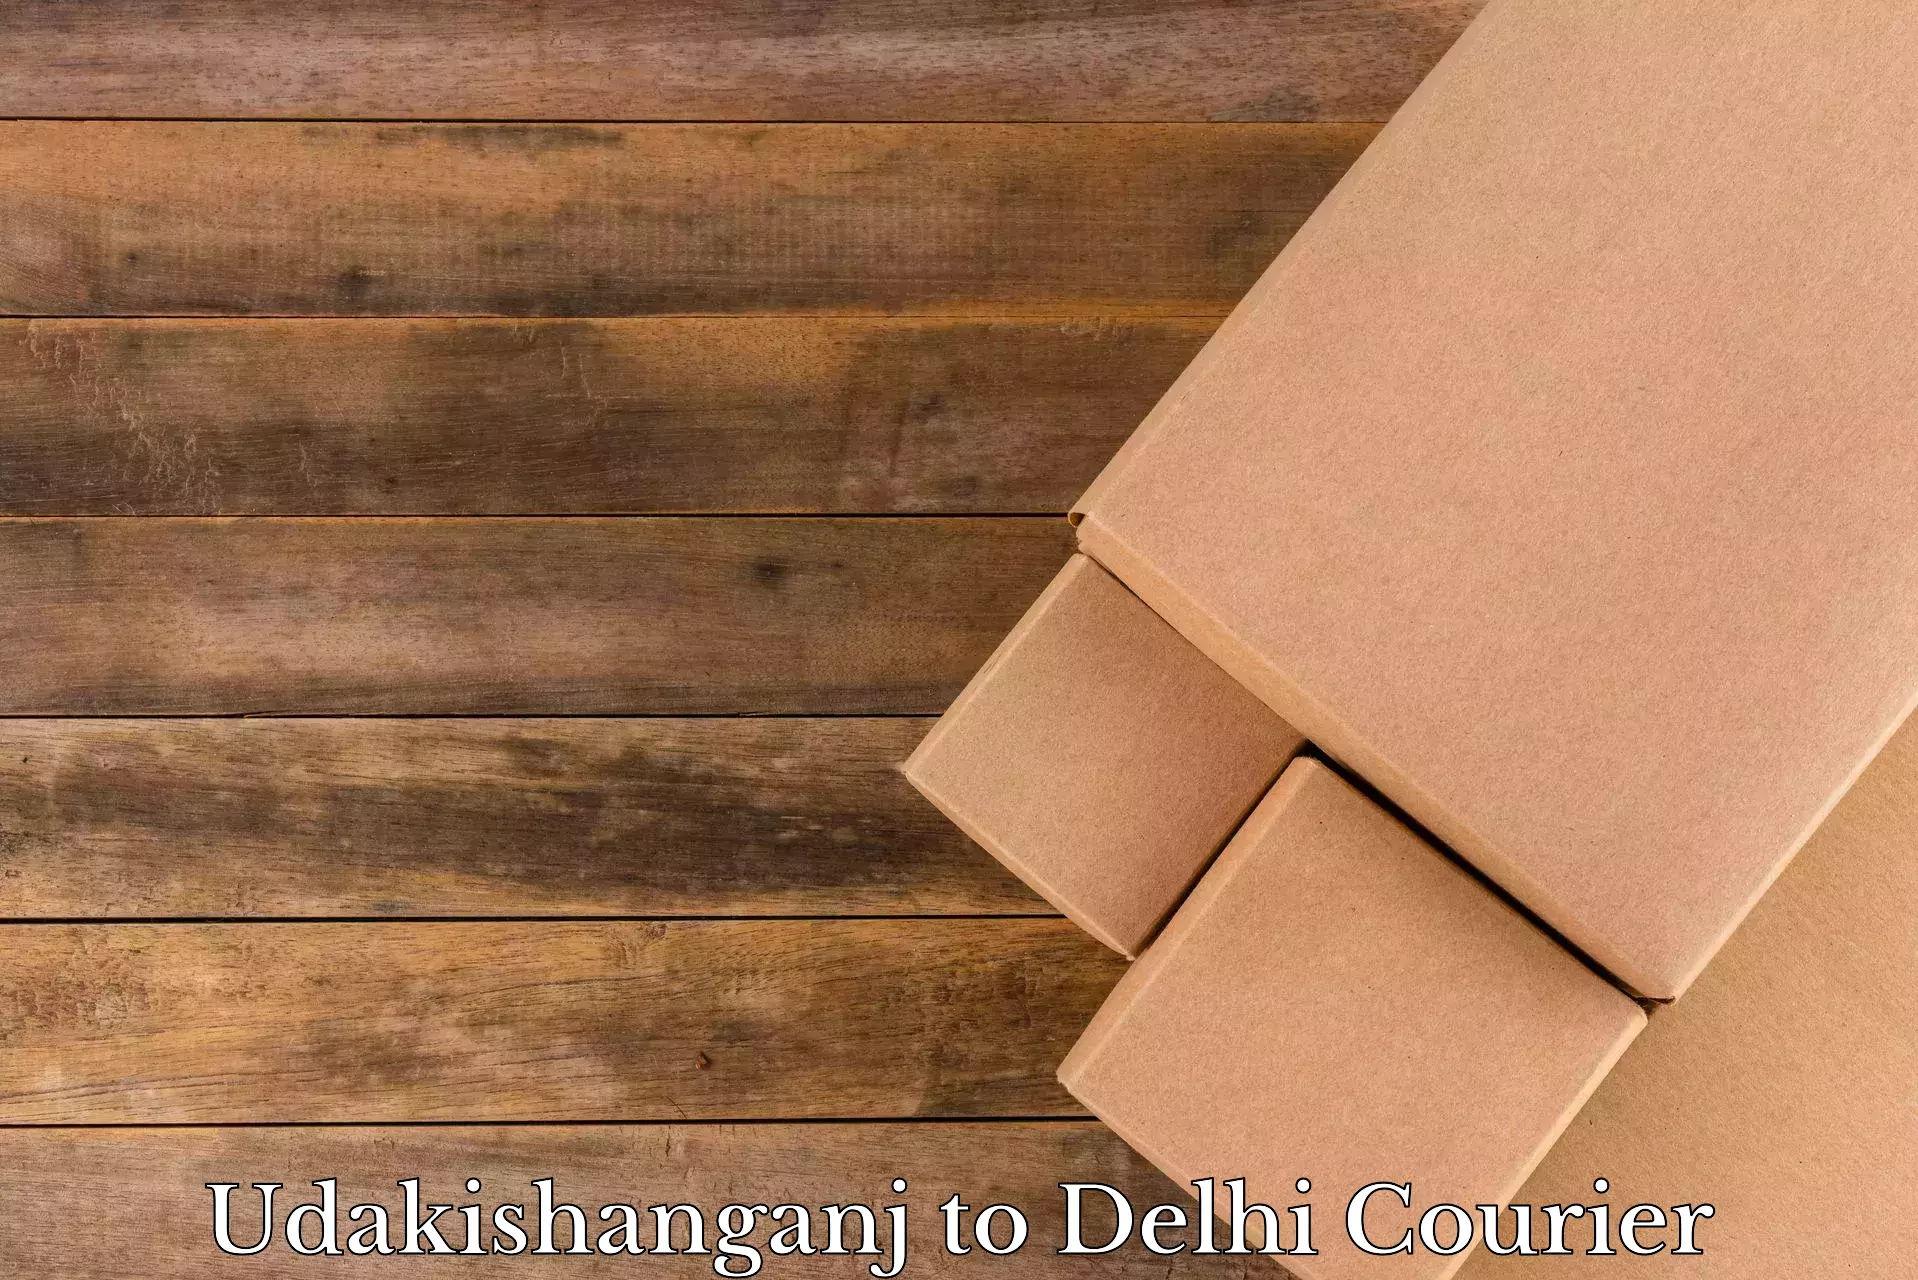 Moving and handling services in Udakishanganj to East Delhi